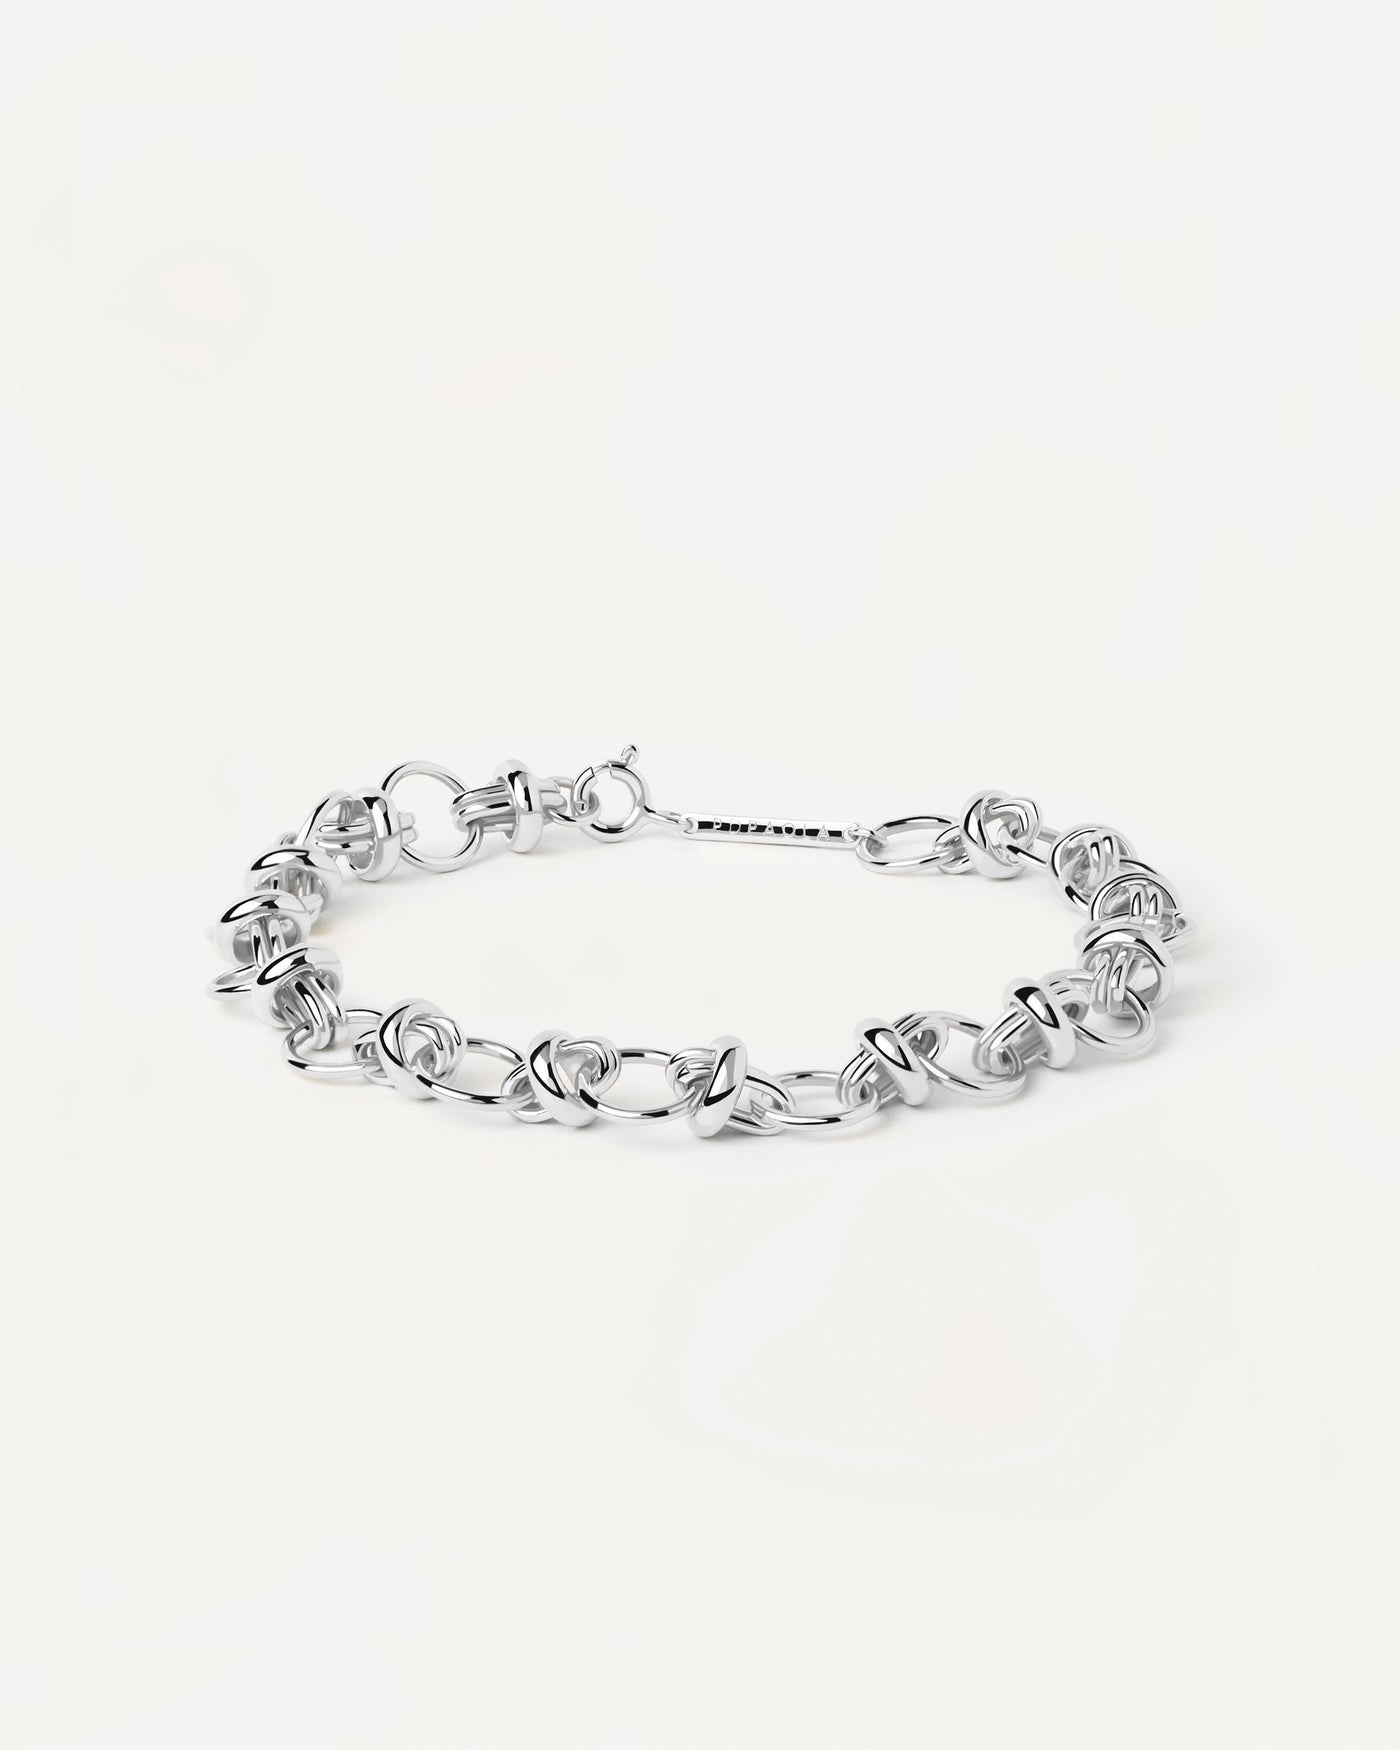 2023 Selection | Meraki Silver Chain Bracelet. Sterling silver chain bracelet with round links. Get the latest arrival from PDPAOLA. Place your order safely and get this Best Seller. Free Shipping.